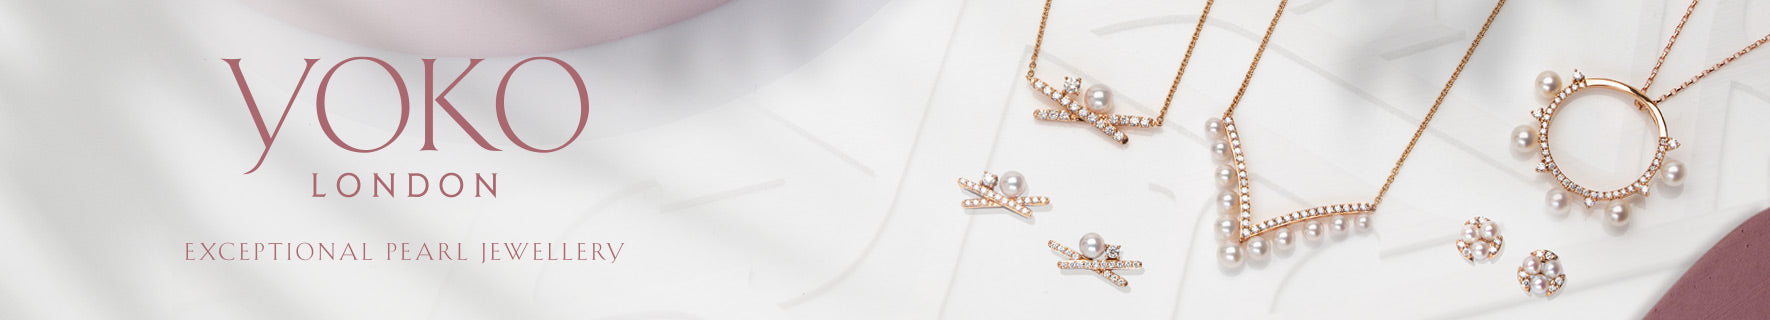 Yoko London - Exceptional Pearl Jewellery. A beautiful sample of our best sellers from out Sleek Collection, featuring style-conscious designs that exude confidence. 